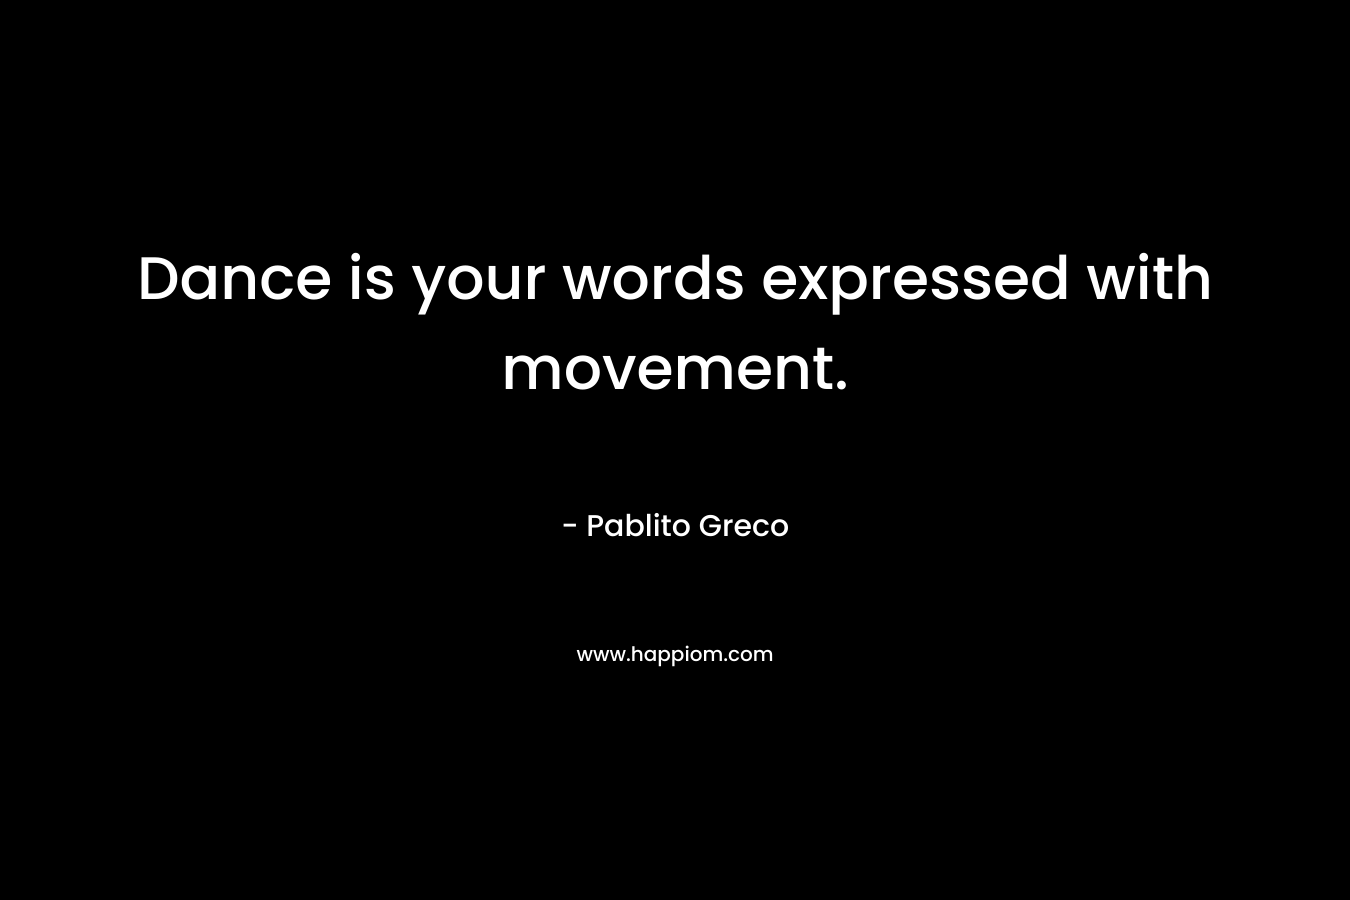 Dance is your words expressed with movement. – Pablito Greco